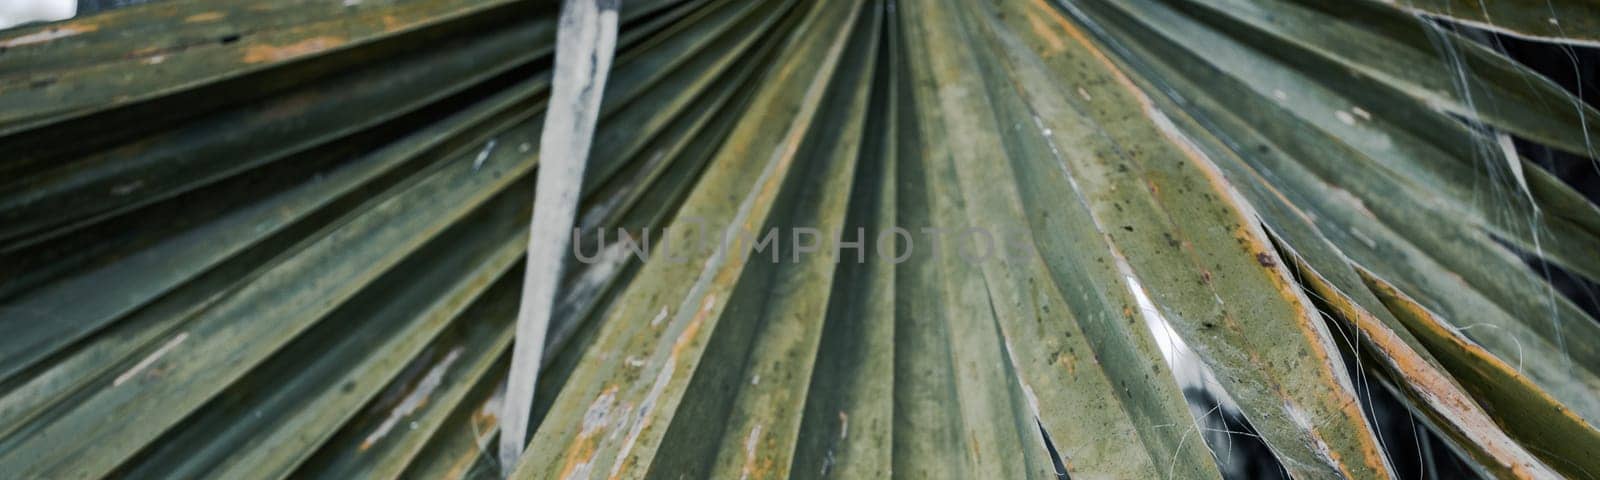 Tropical palm leaves, floral background photo. Rounded palm leaf of the licuala valida, Barcelona. Street scene. High quality picture for wallpaper, article